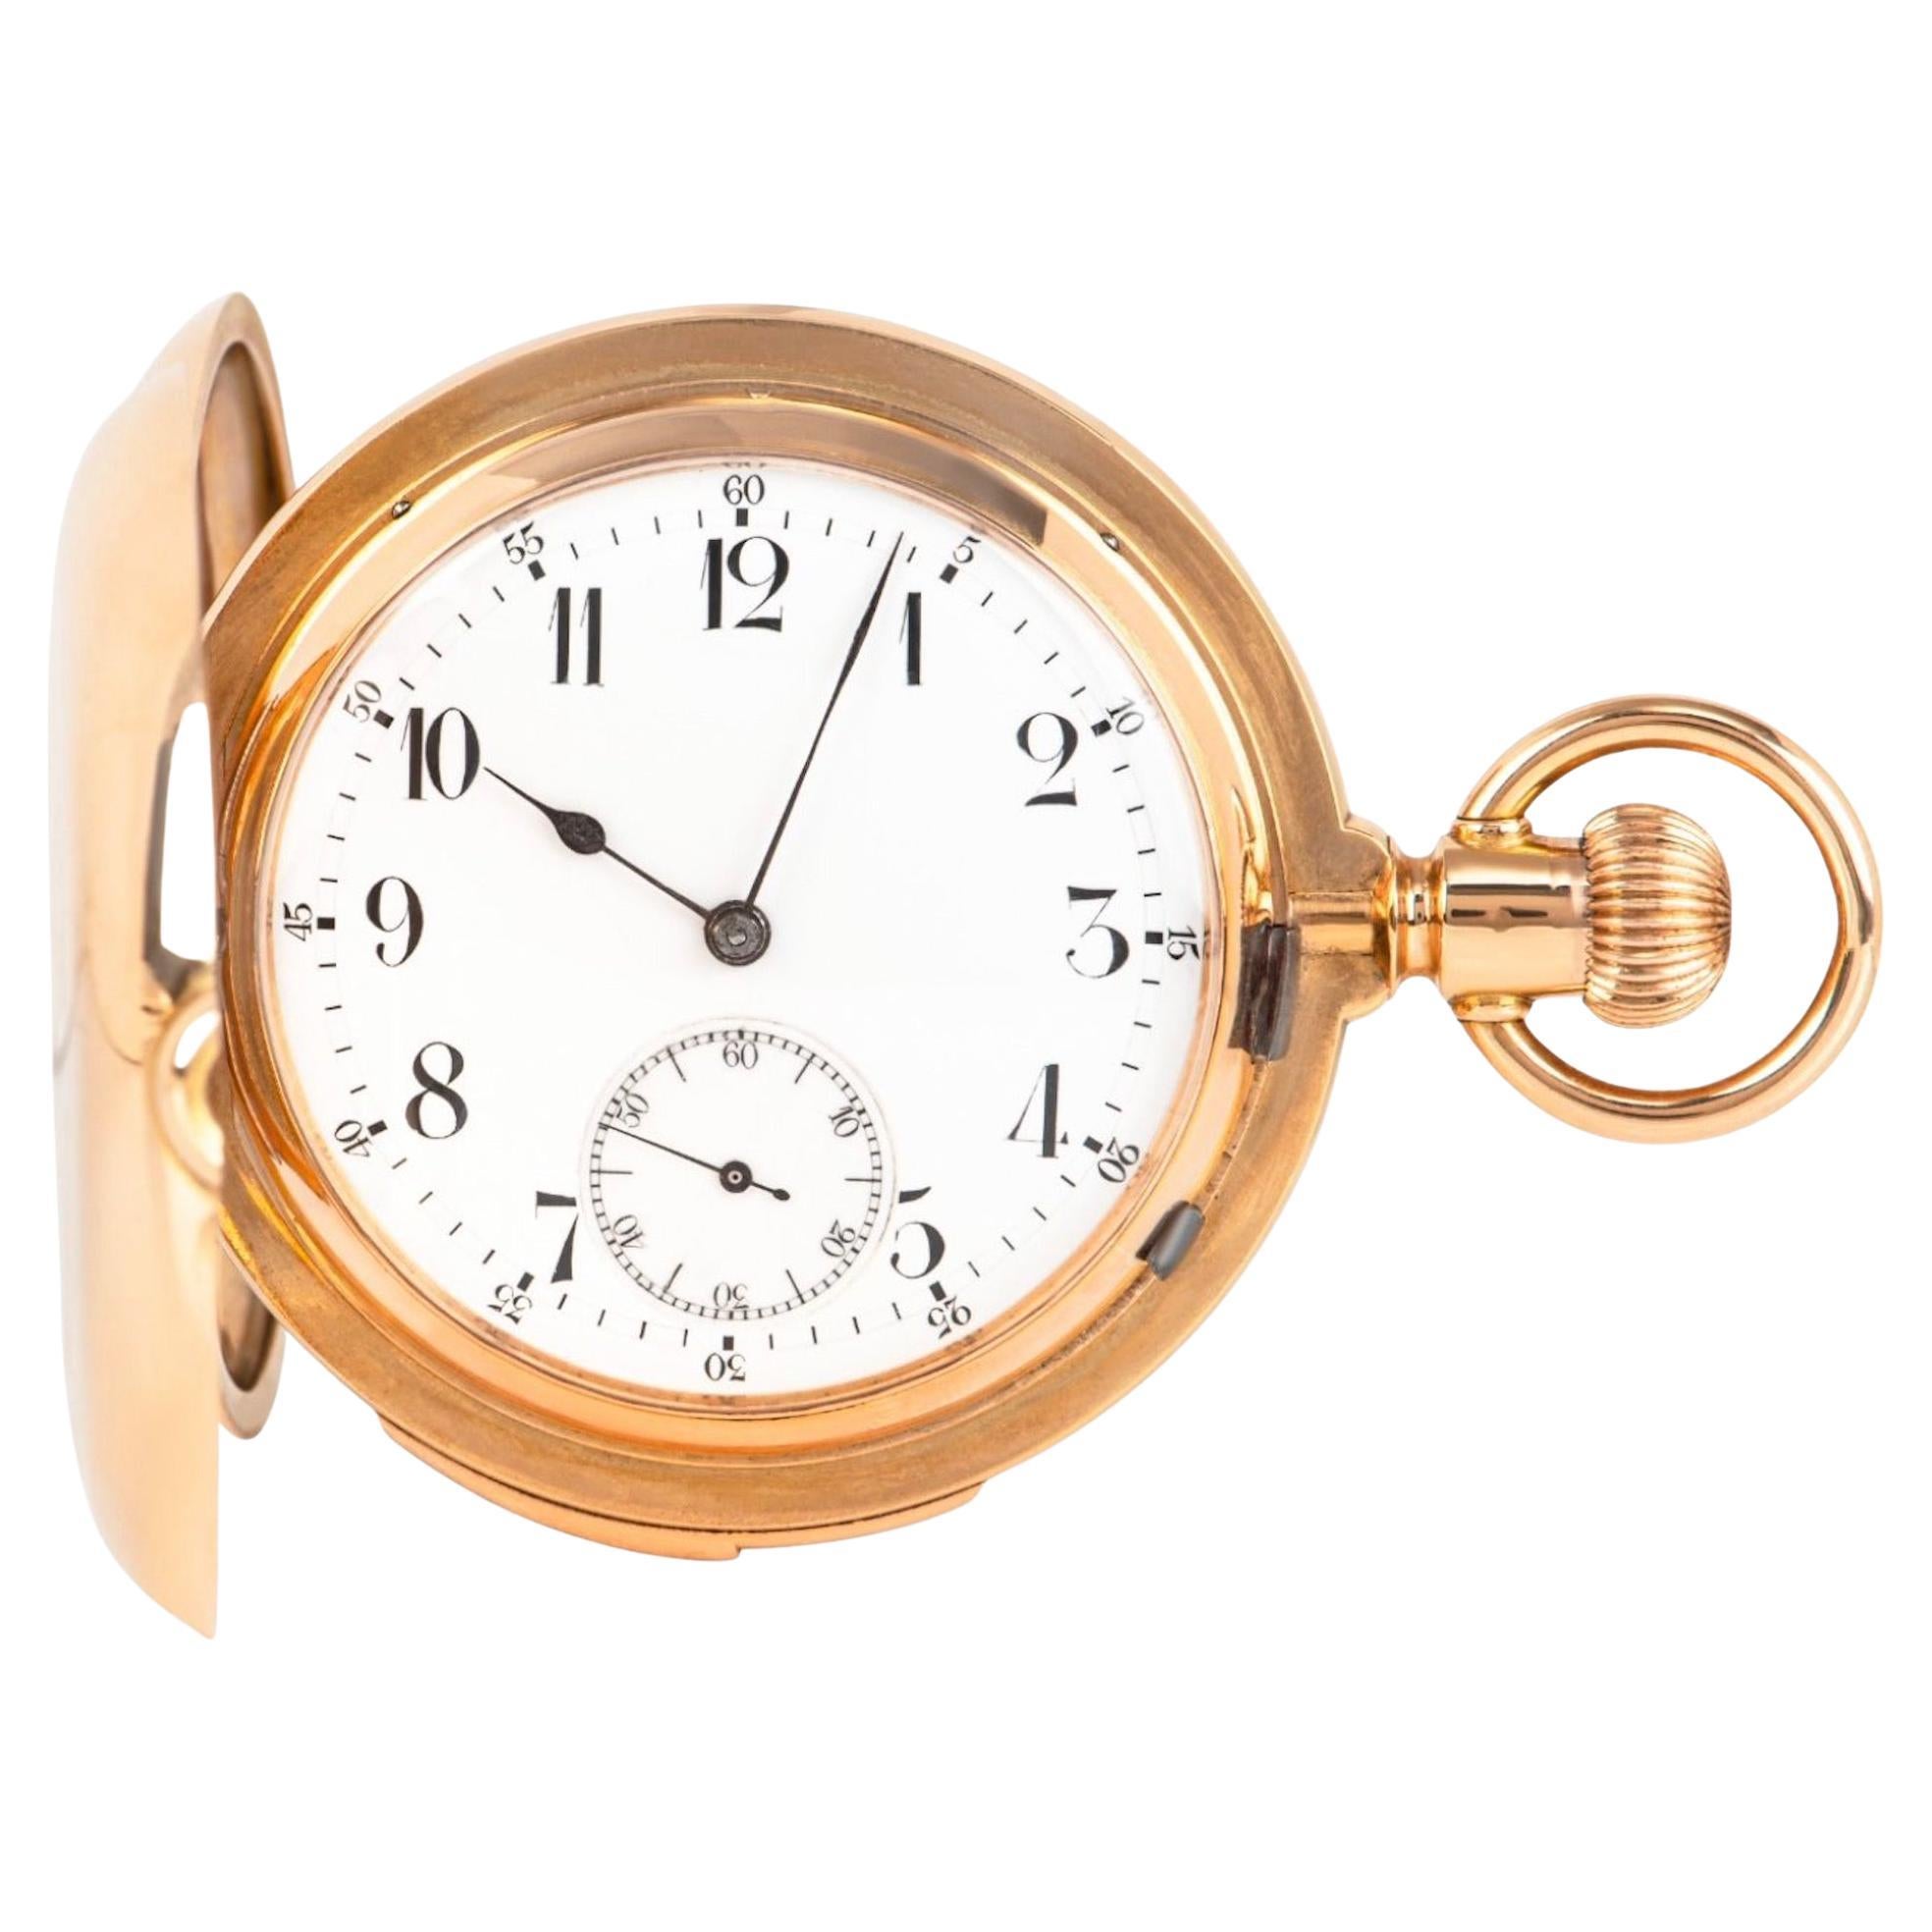 Swiss Rose Gold Double-Sided Calendar Quarter Repeated Keyless Lever PocketWatch